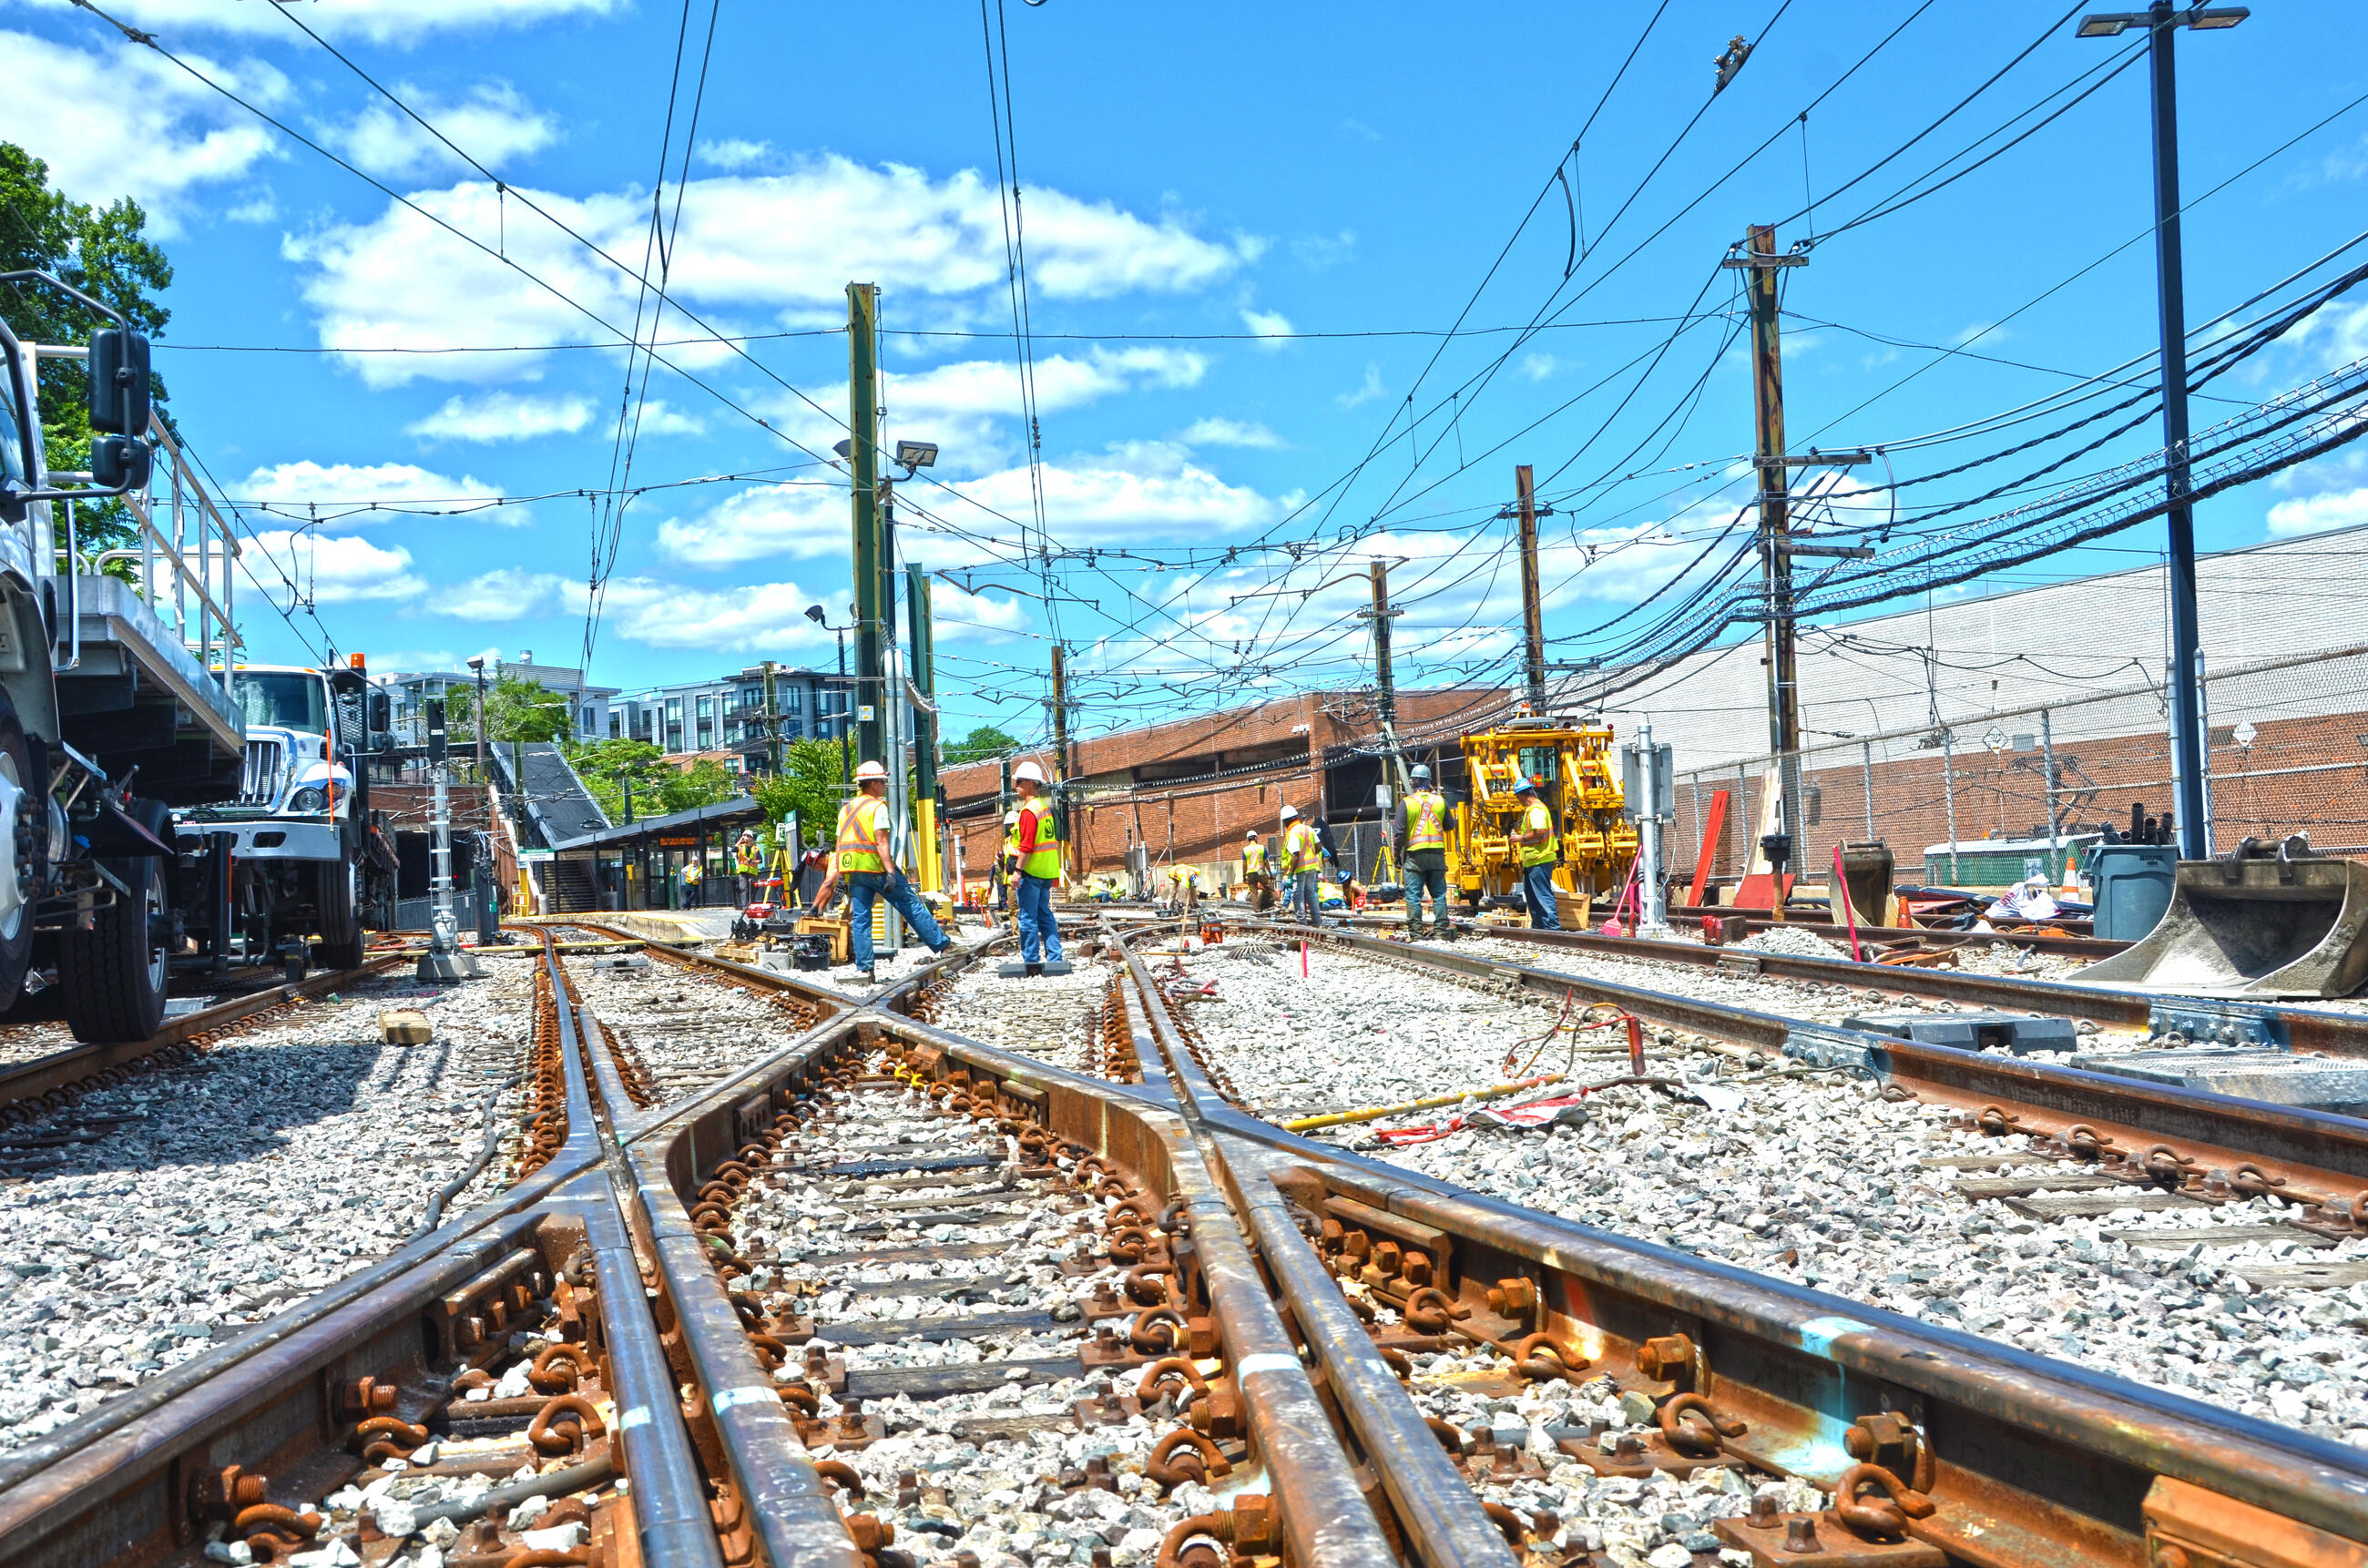 Crews work on special trackwork at the Reservoir Yard on the Green Line D Branch 